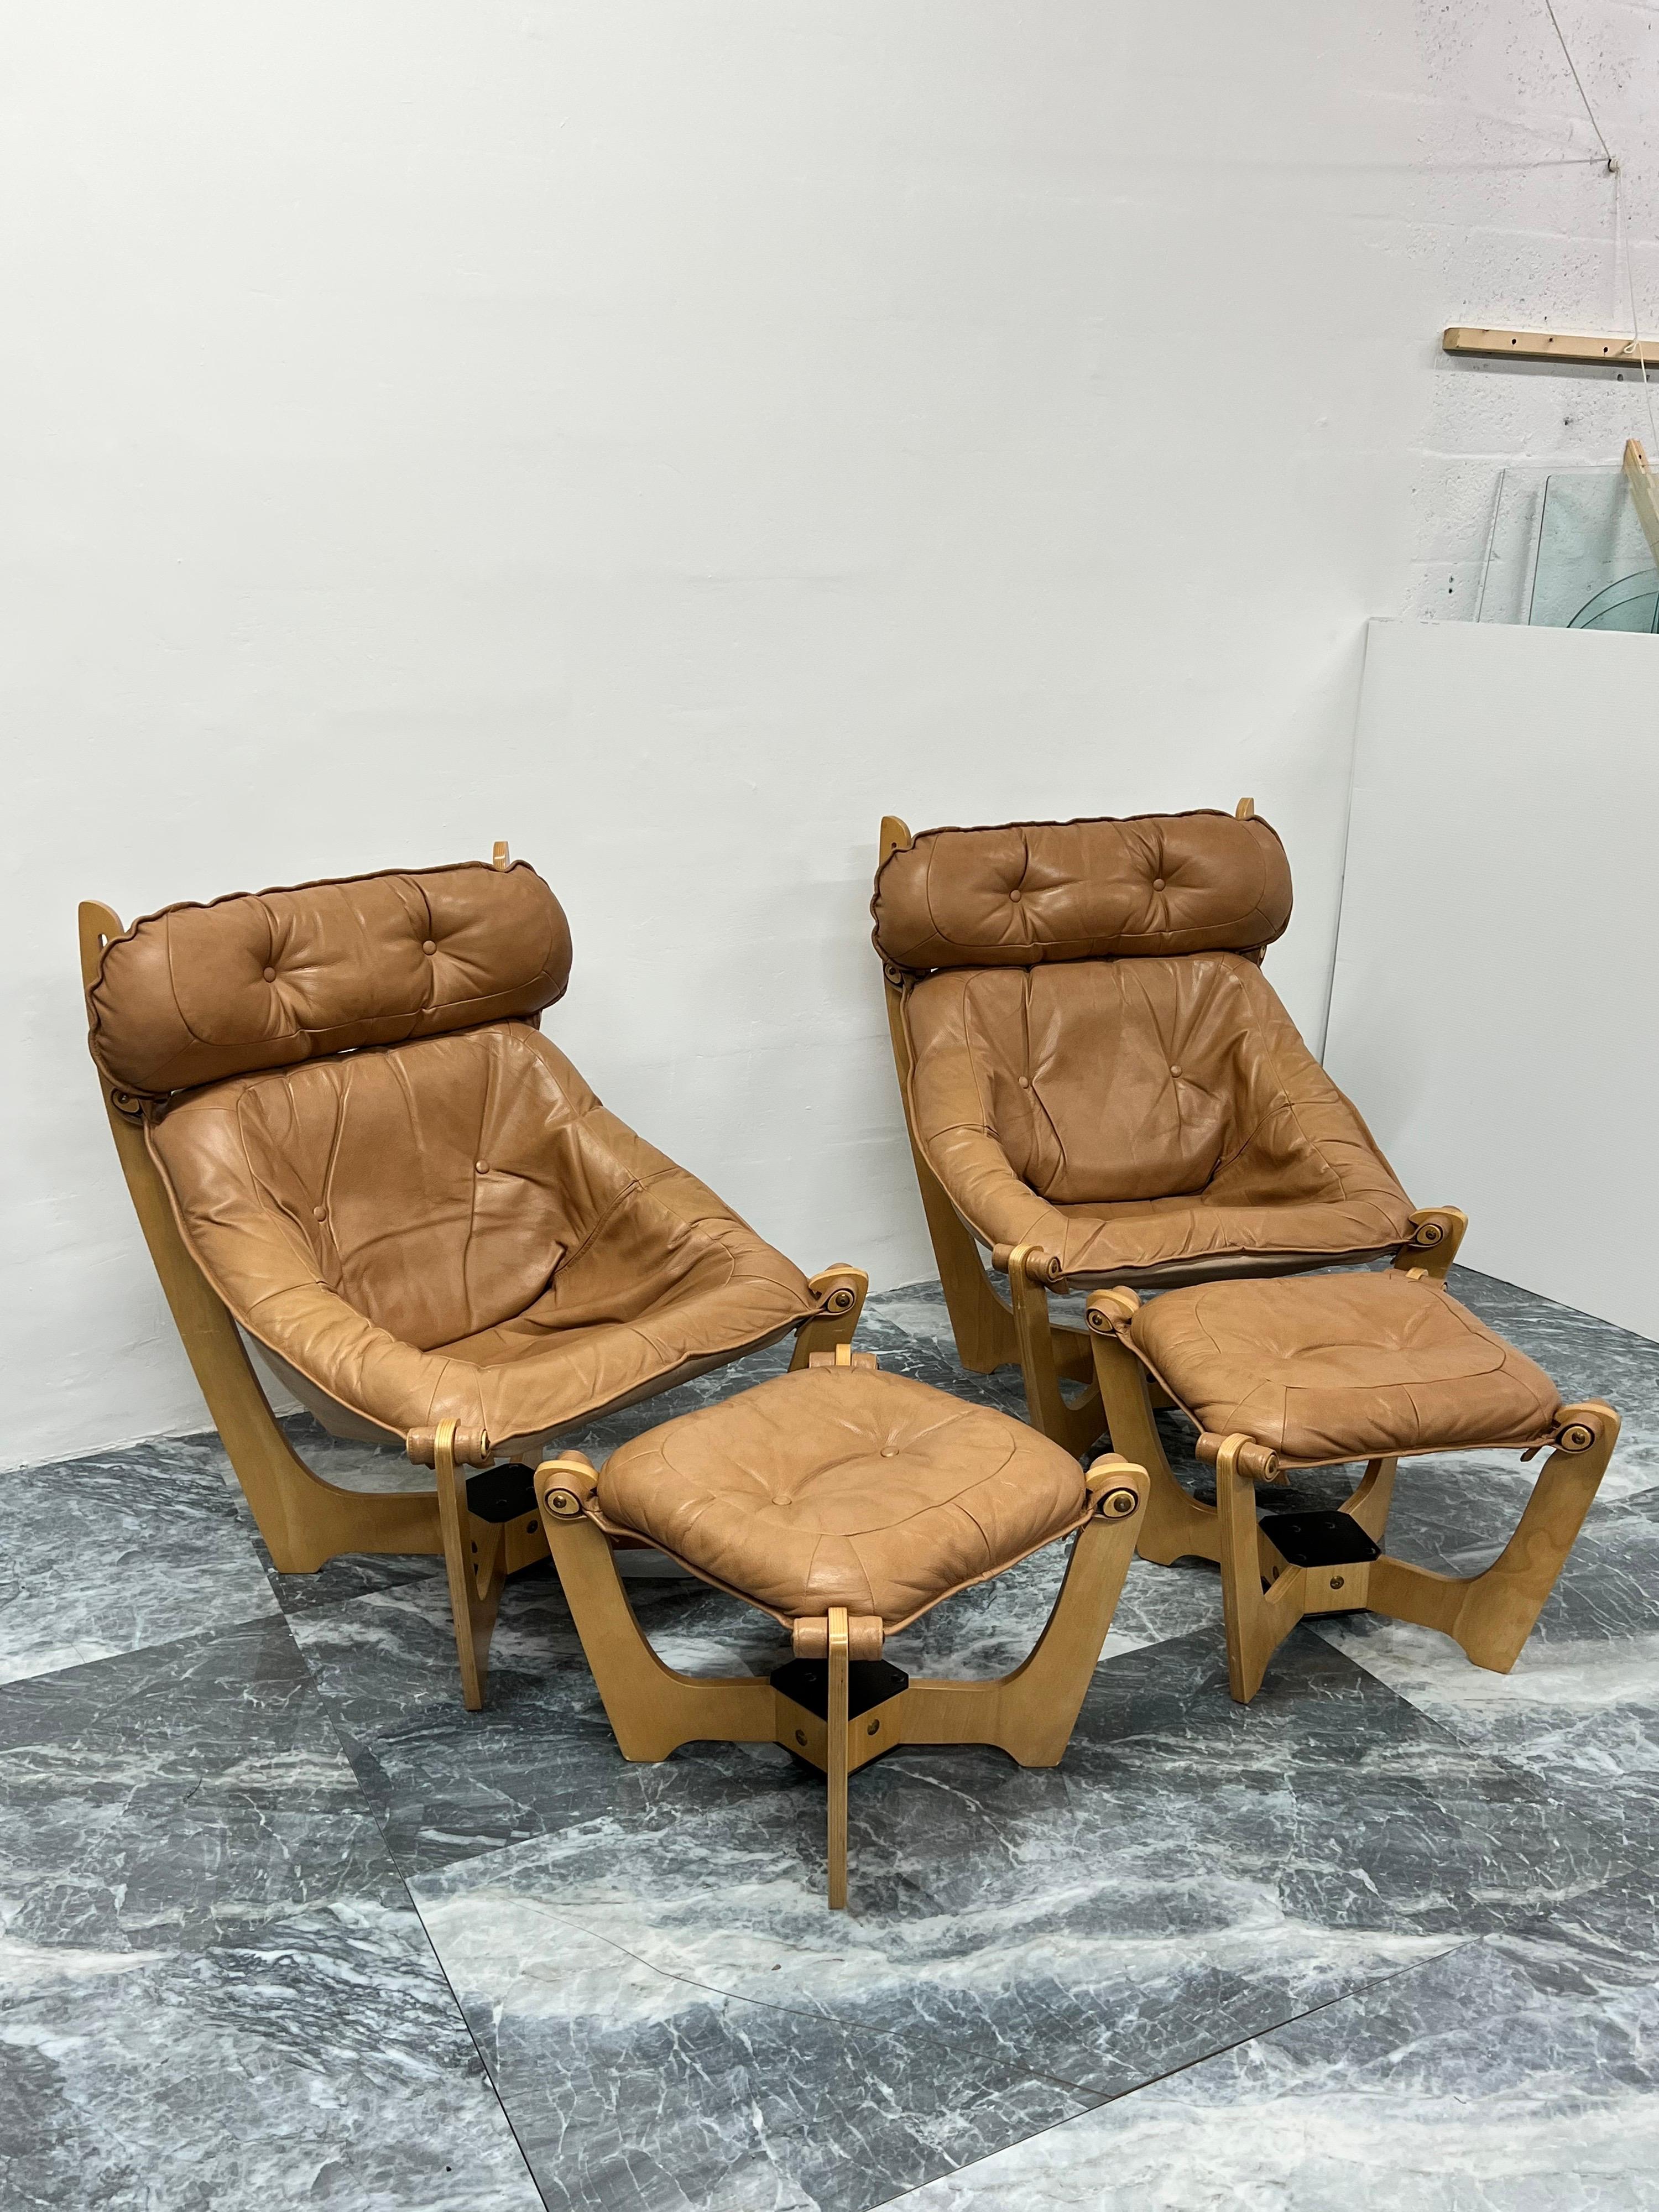 Pair of lounge chairs with tan leather sling seats suspended from light blonde stained wood frame with footrest by Odd Knutsen for IMG Norway.

Dimensions:
Chair - W 30